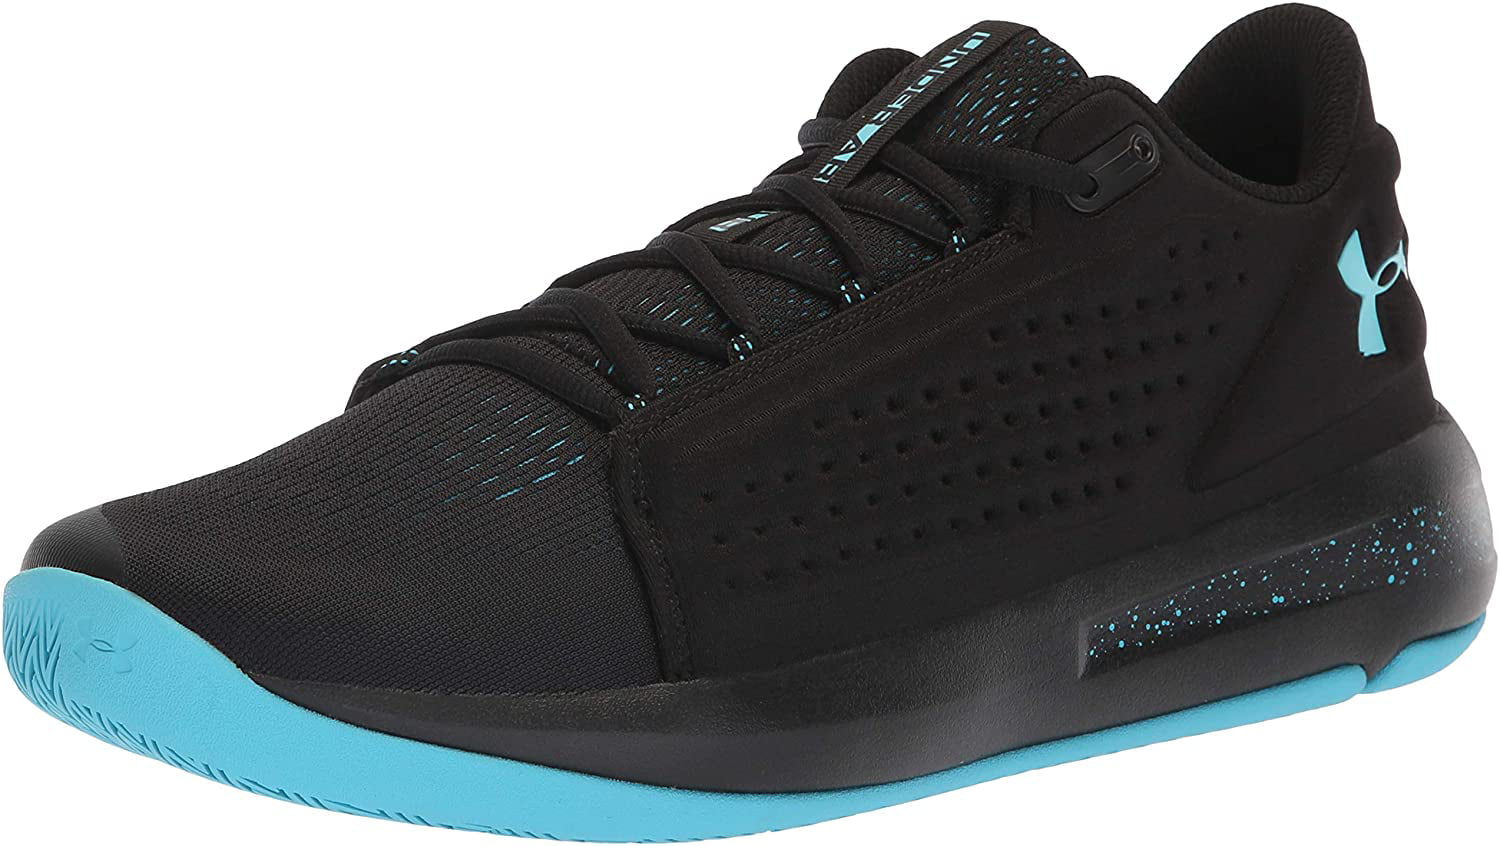 Under Armour Men's Torch Low Basketball 